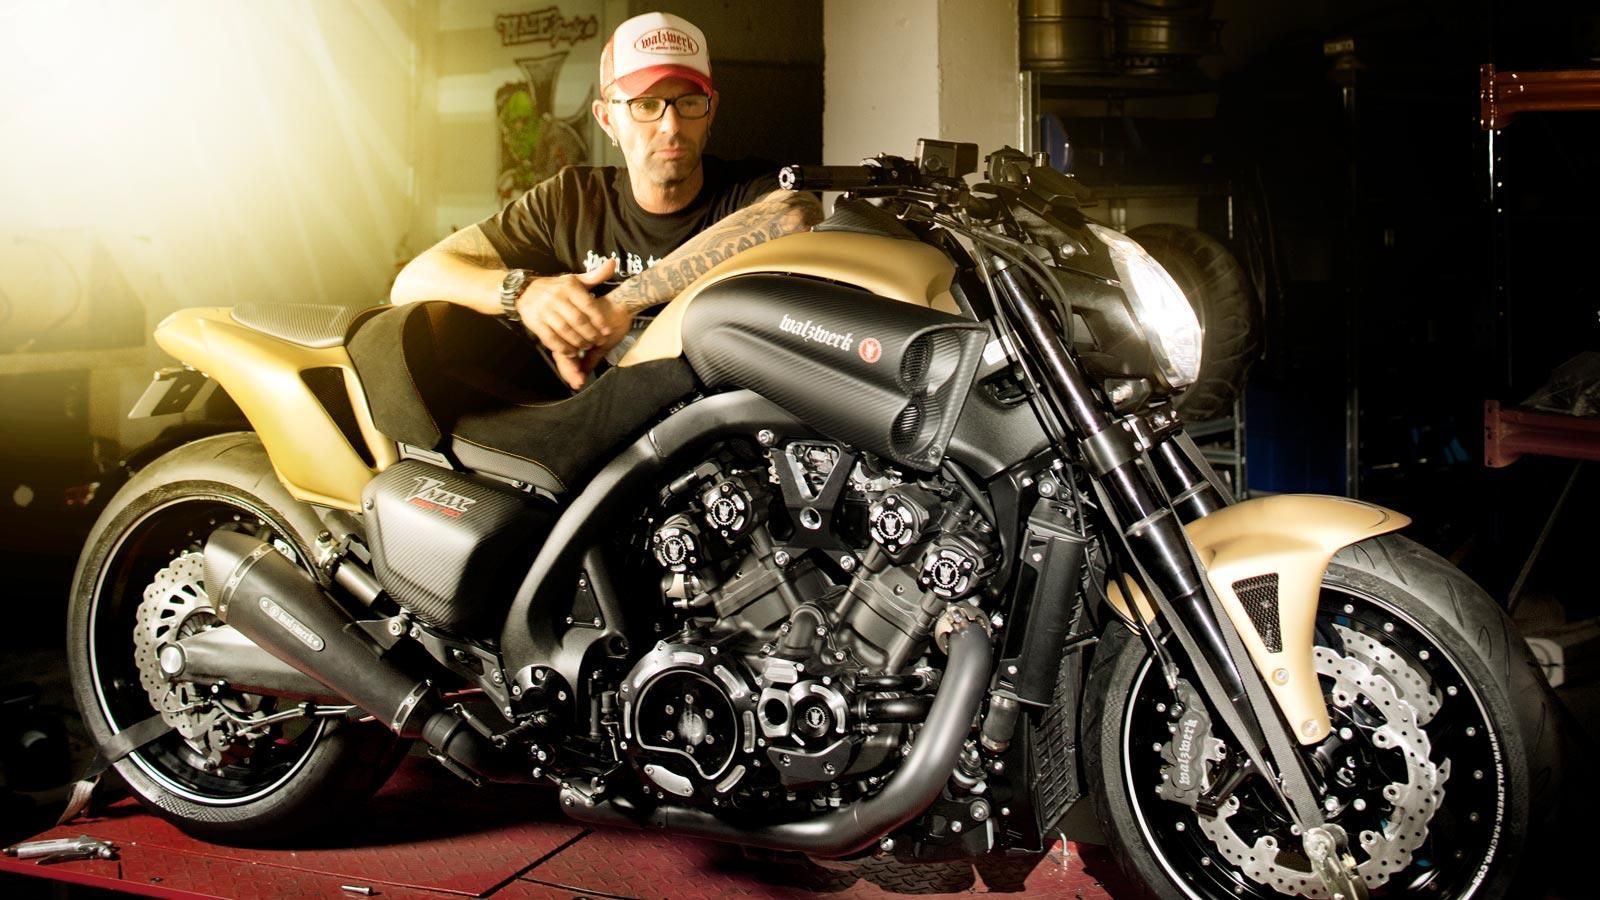 2012 Yamaha V-MAX Hyper Modified by Marcus Walz